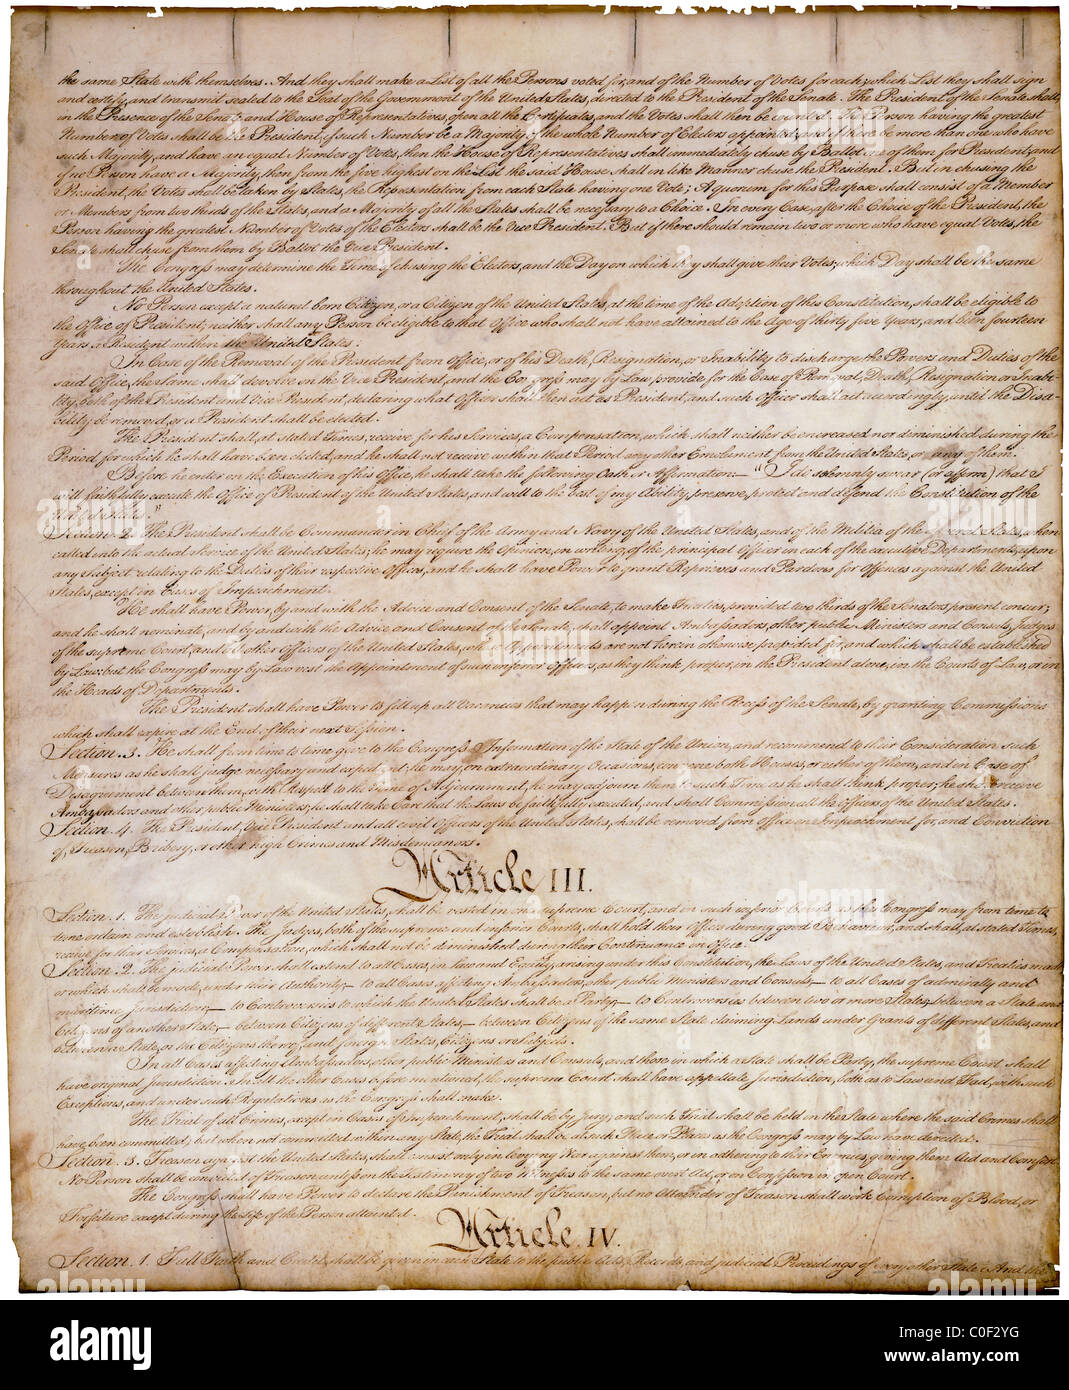 Article III-IV of the US Constitution - original hand written copy on parchment the supreme law of the United States 1787 Stock Photo